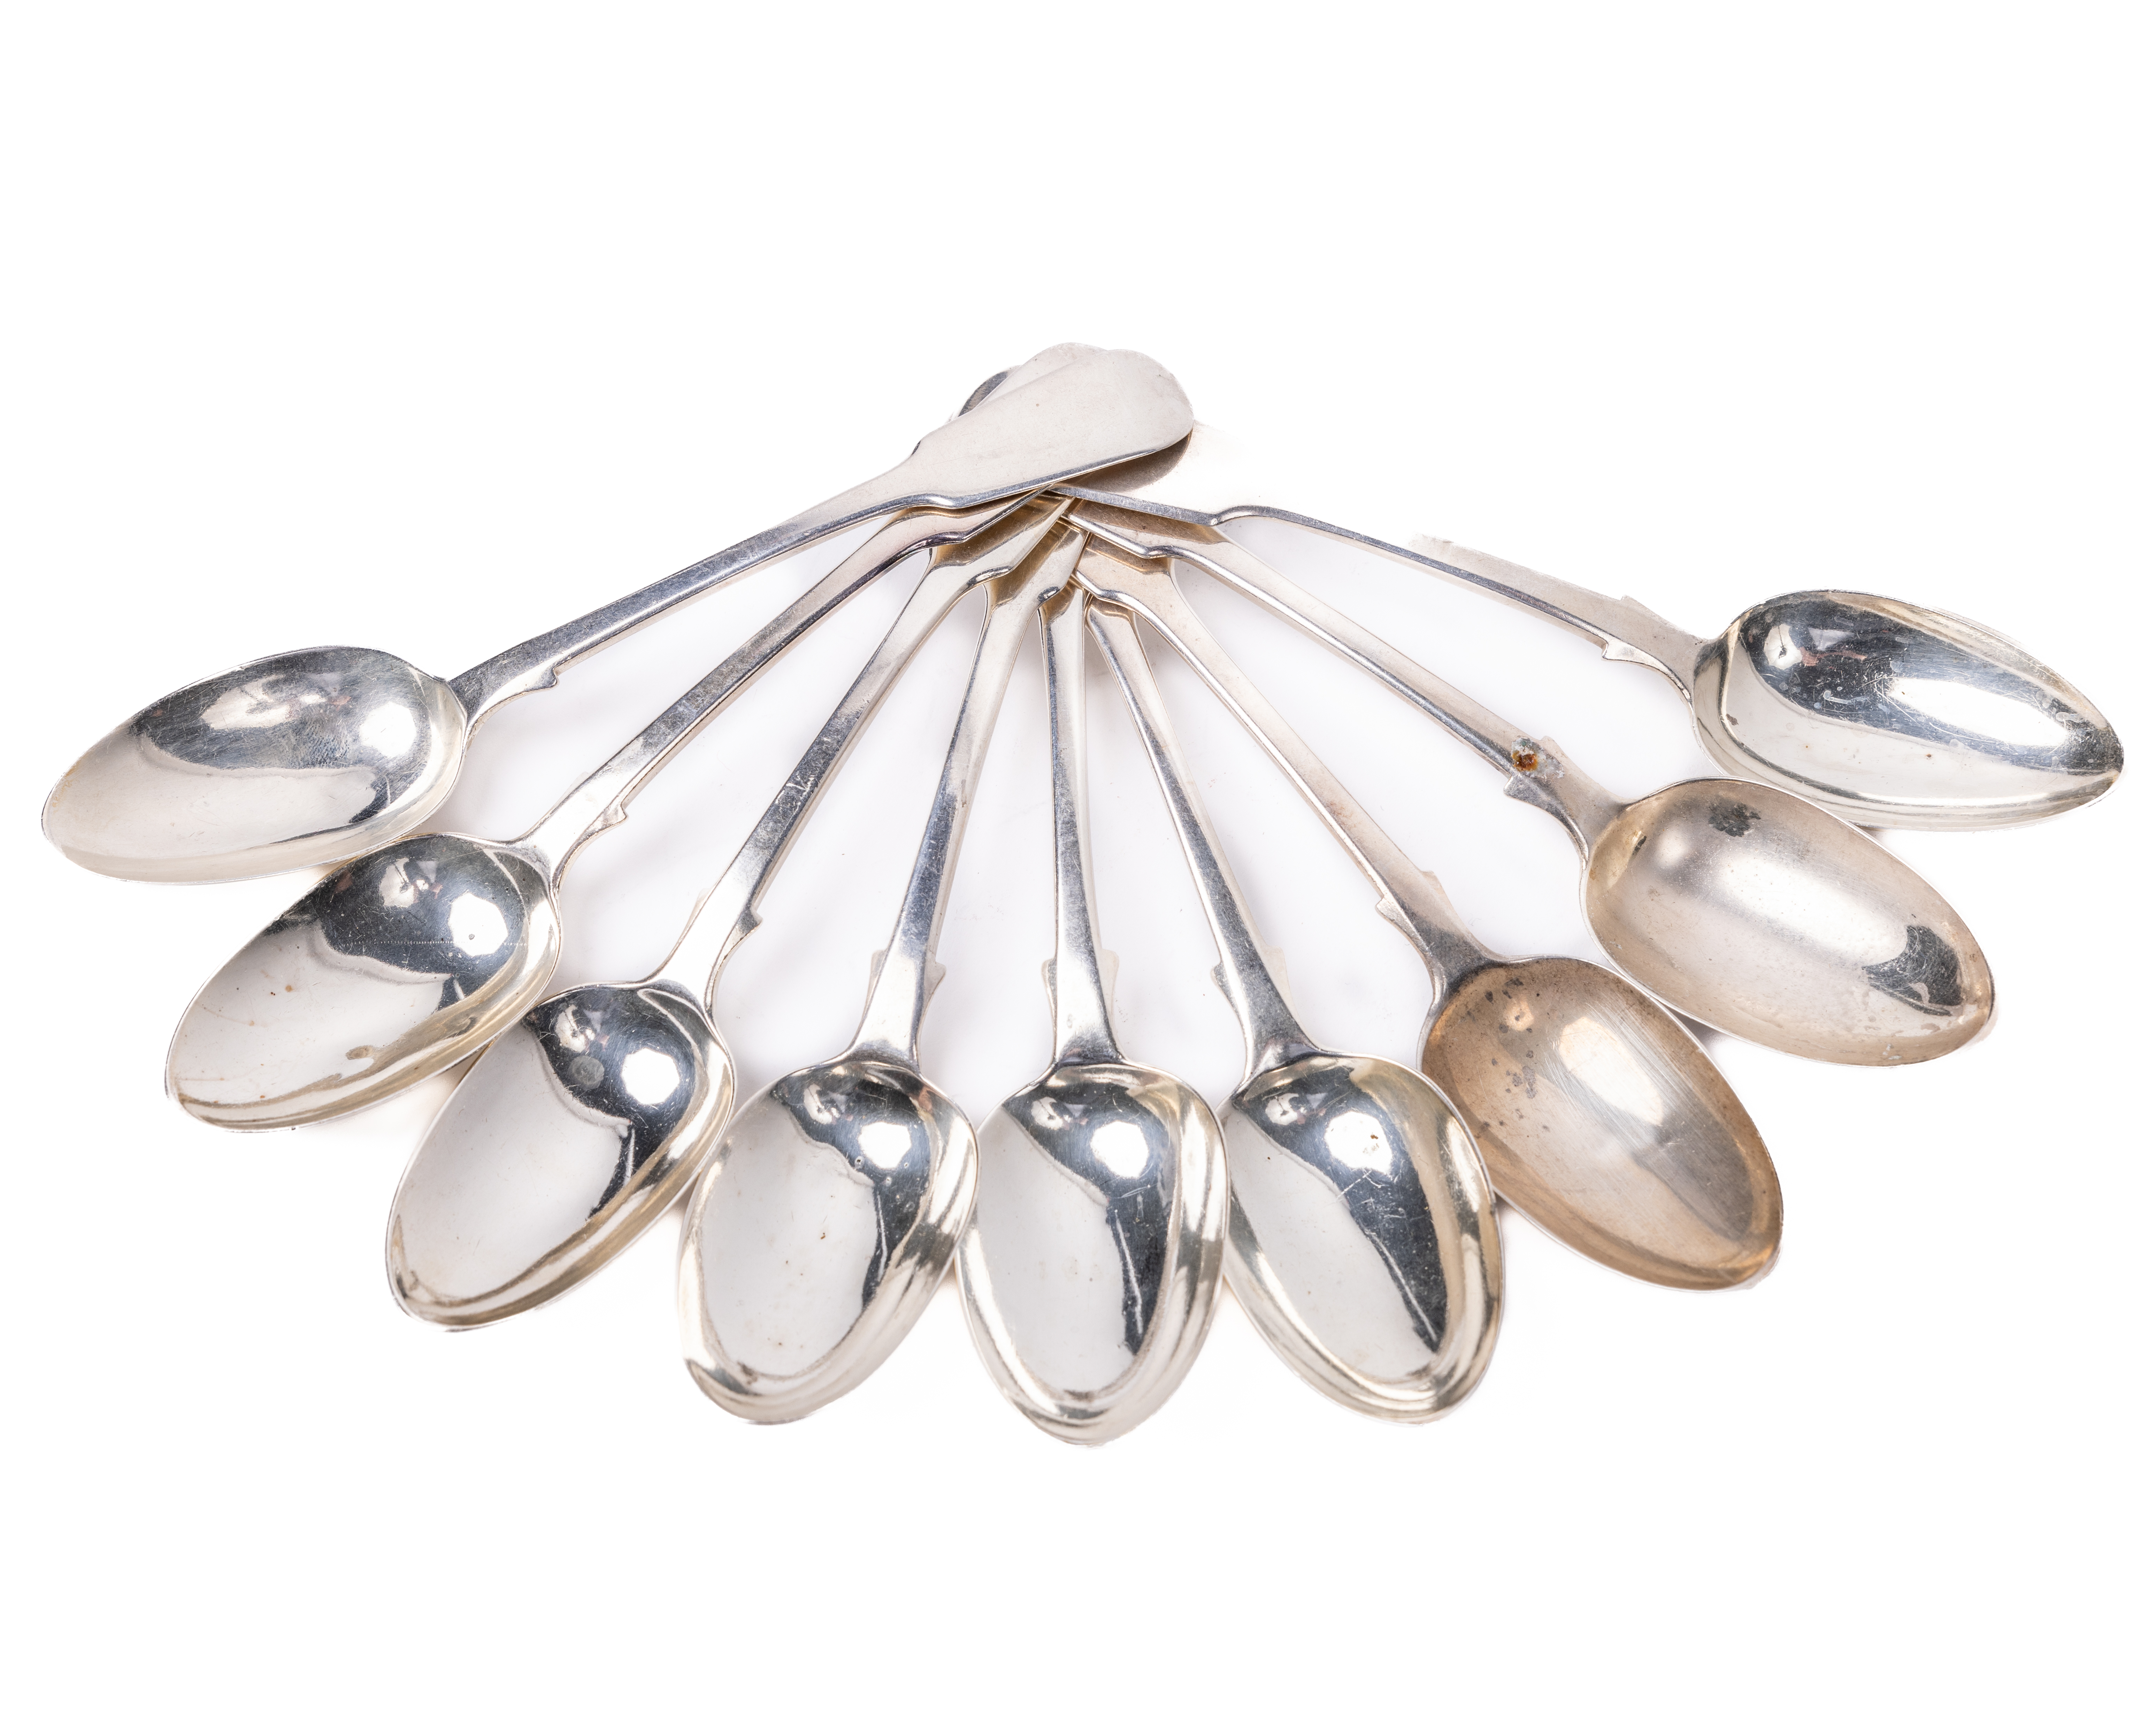 A set of 9 English silver Victorian Dessert Spoons, by George Aldwinckle, London, c. 1853, approx.